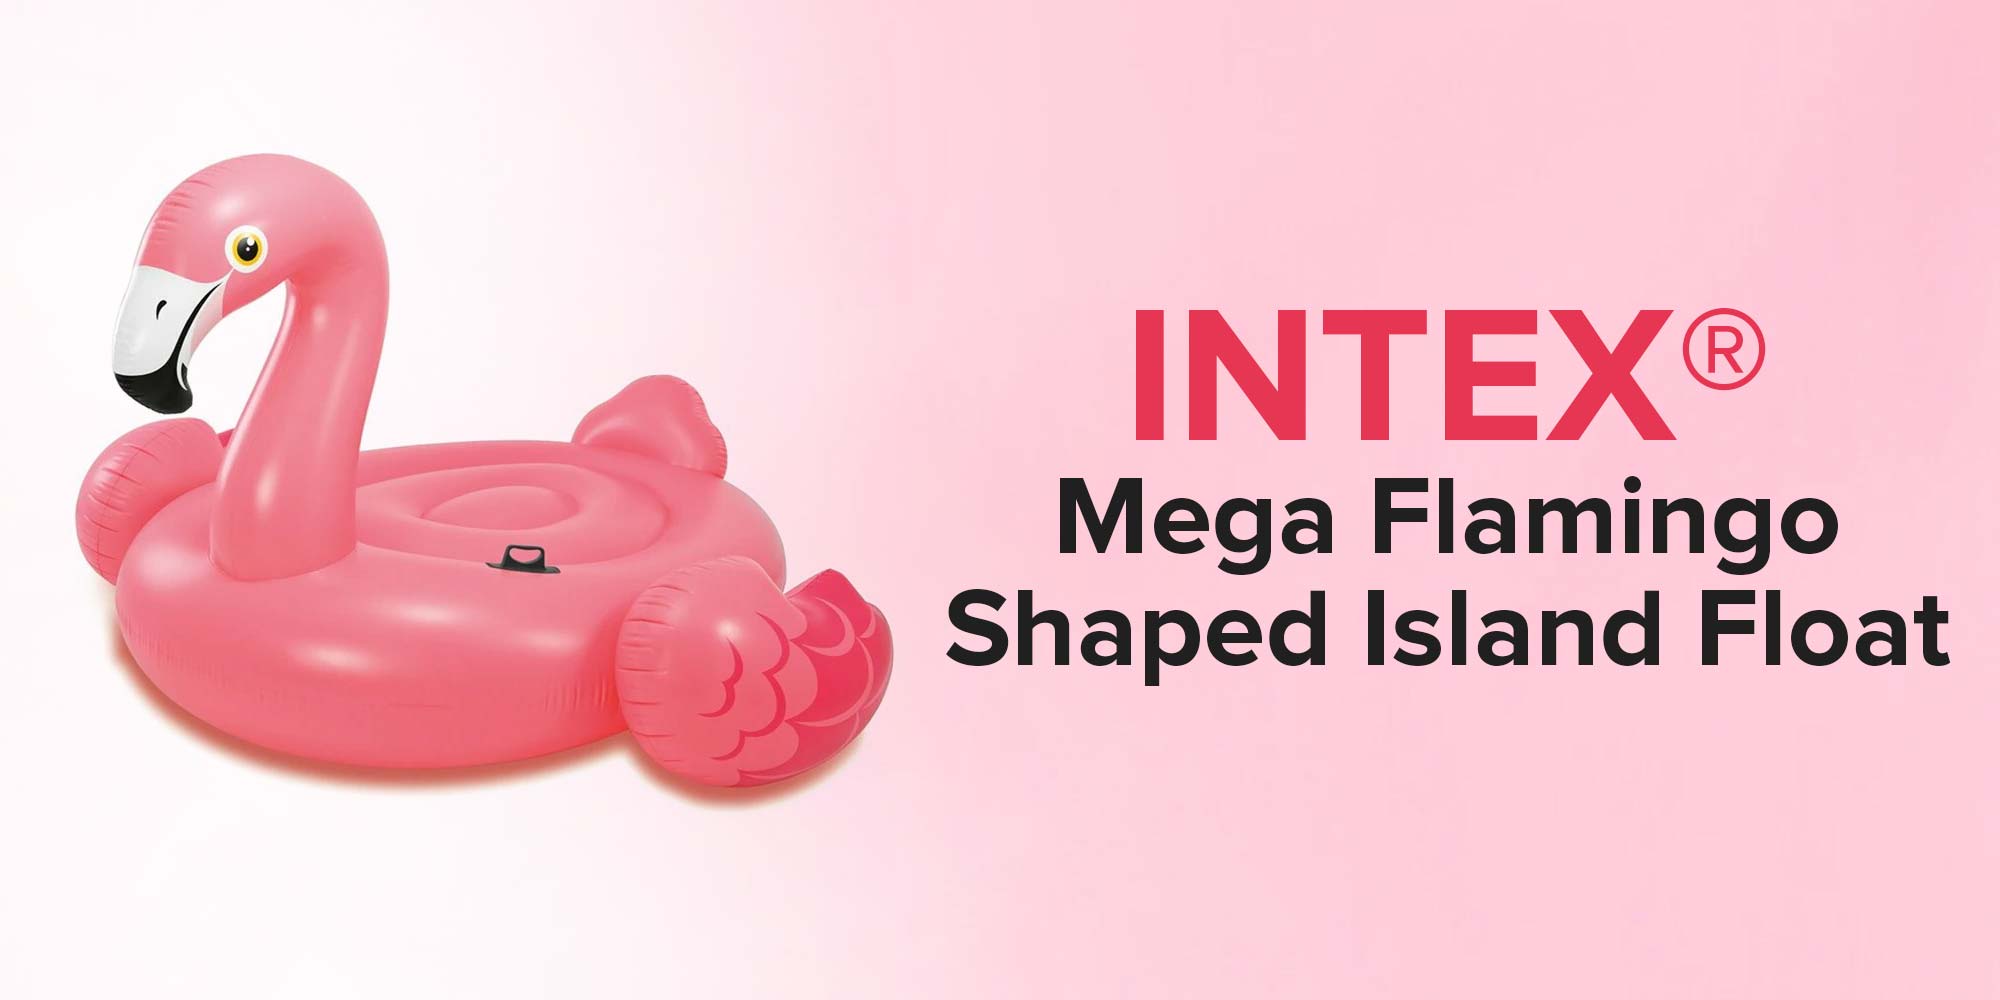 Mega Flamingo Island Ride Inflatable Perfect Pool Floating Raft Toy For Summer 218x211x136cm